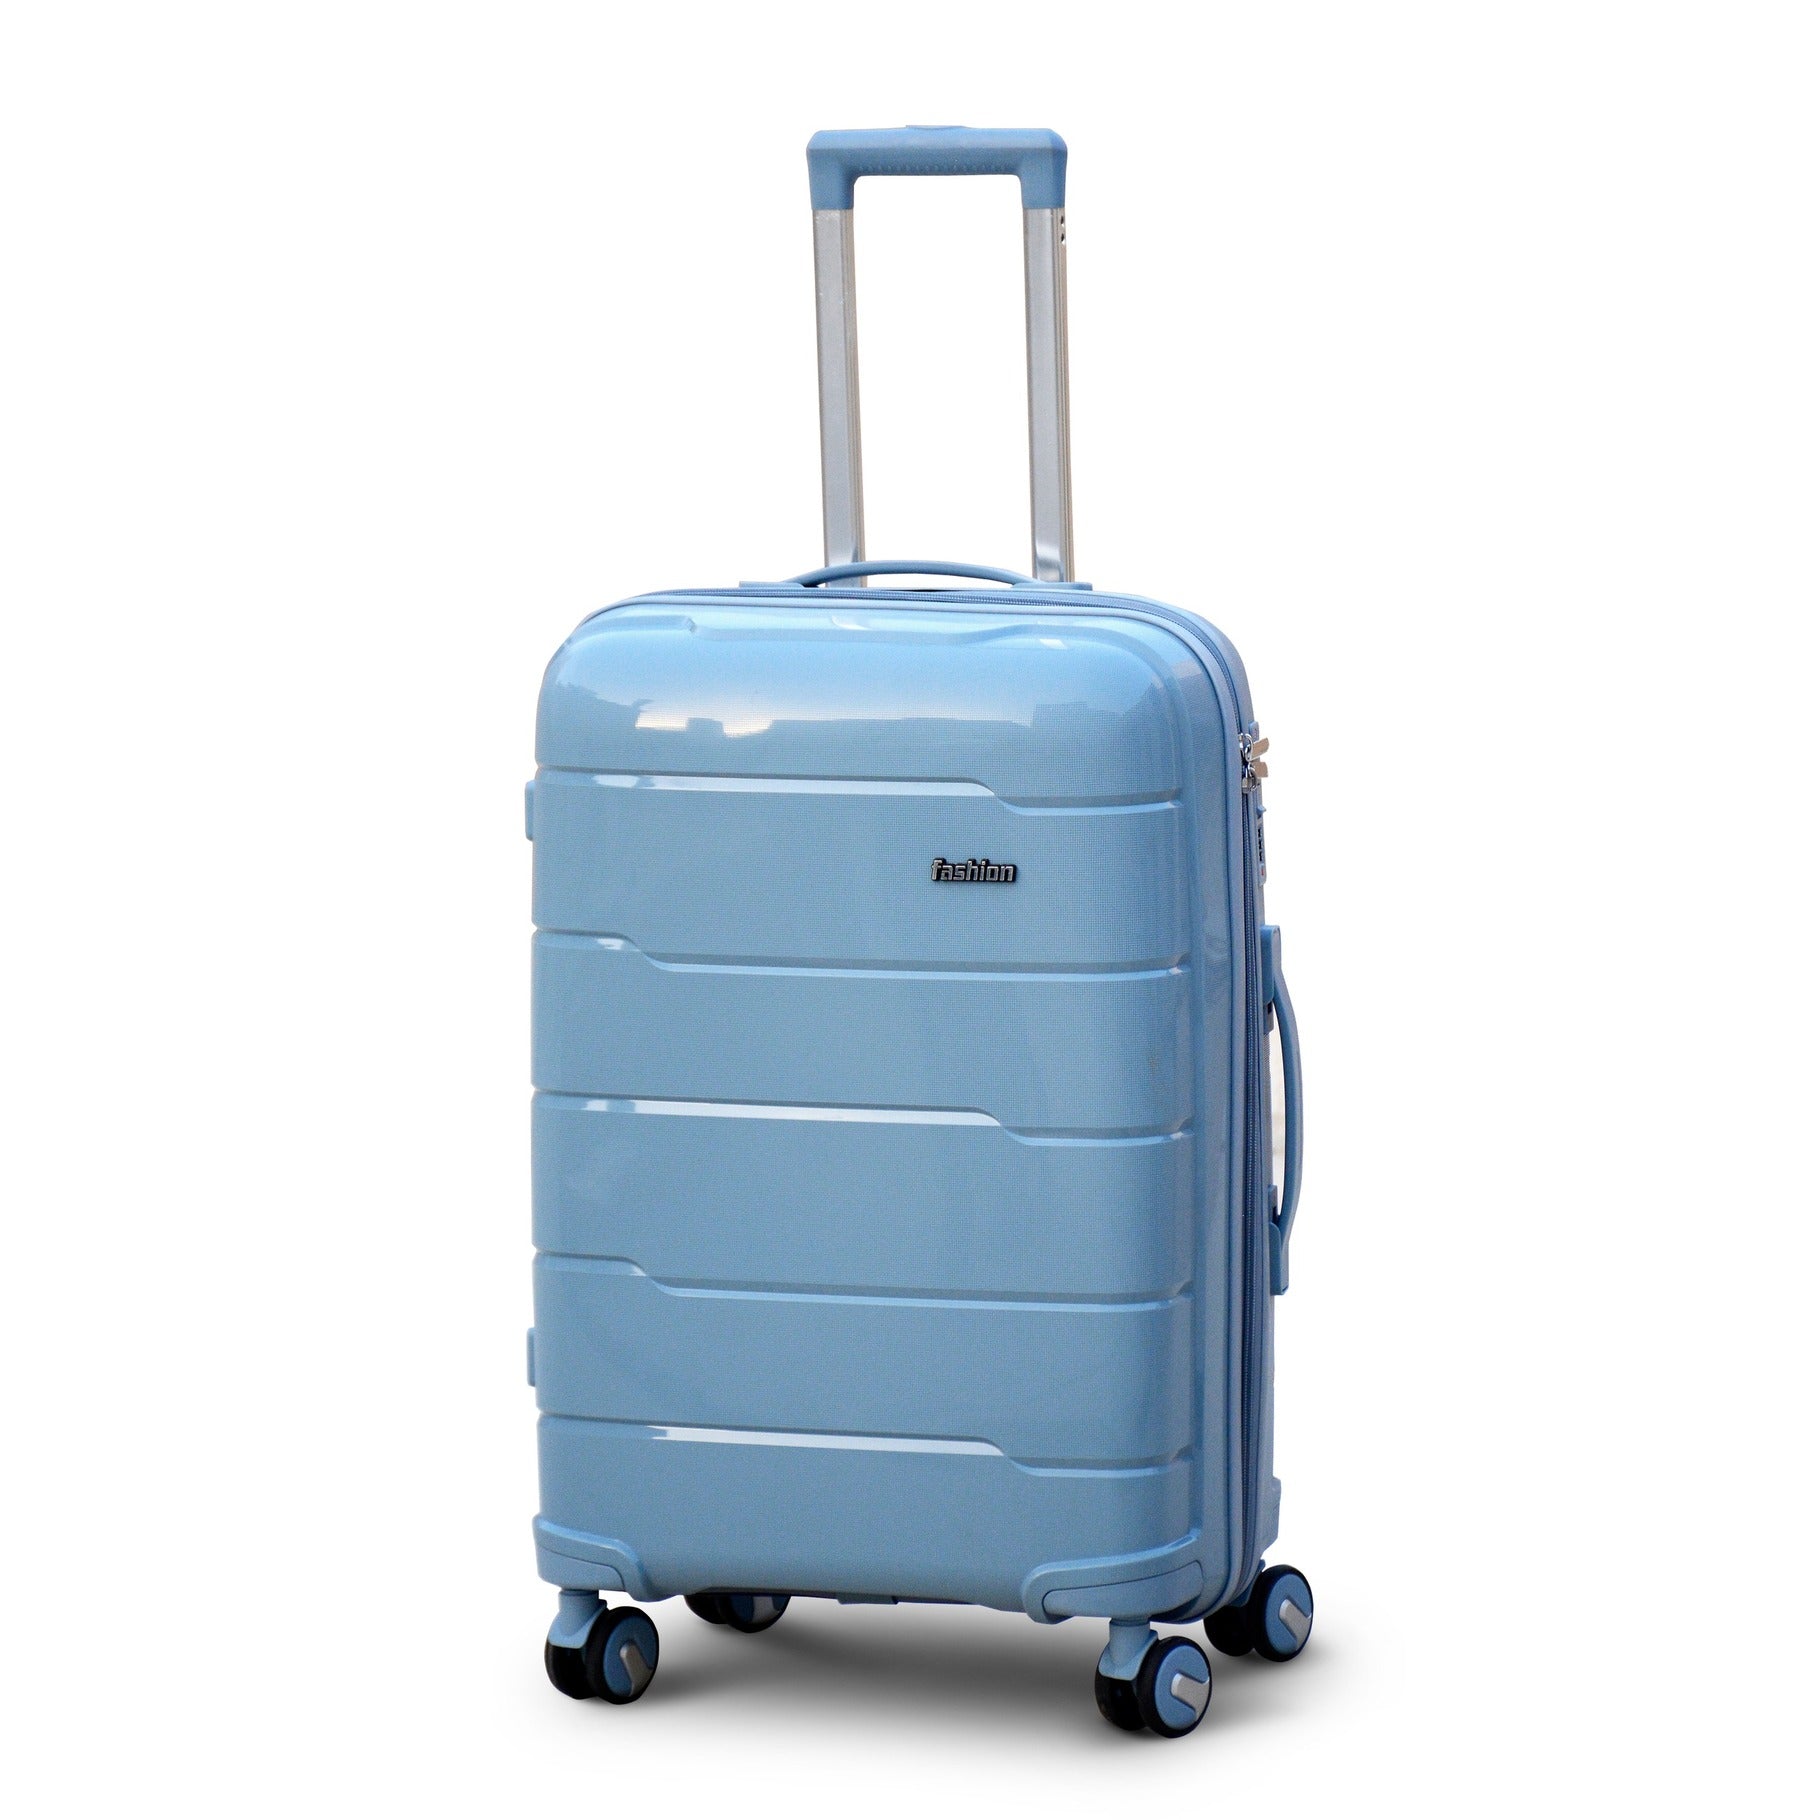 20" Grey Colour Non Expandable Ceramic PP Luggage Lightweight Hard Case Carry On Trolley Bag With Double Spinner Wheel